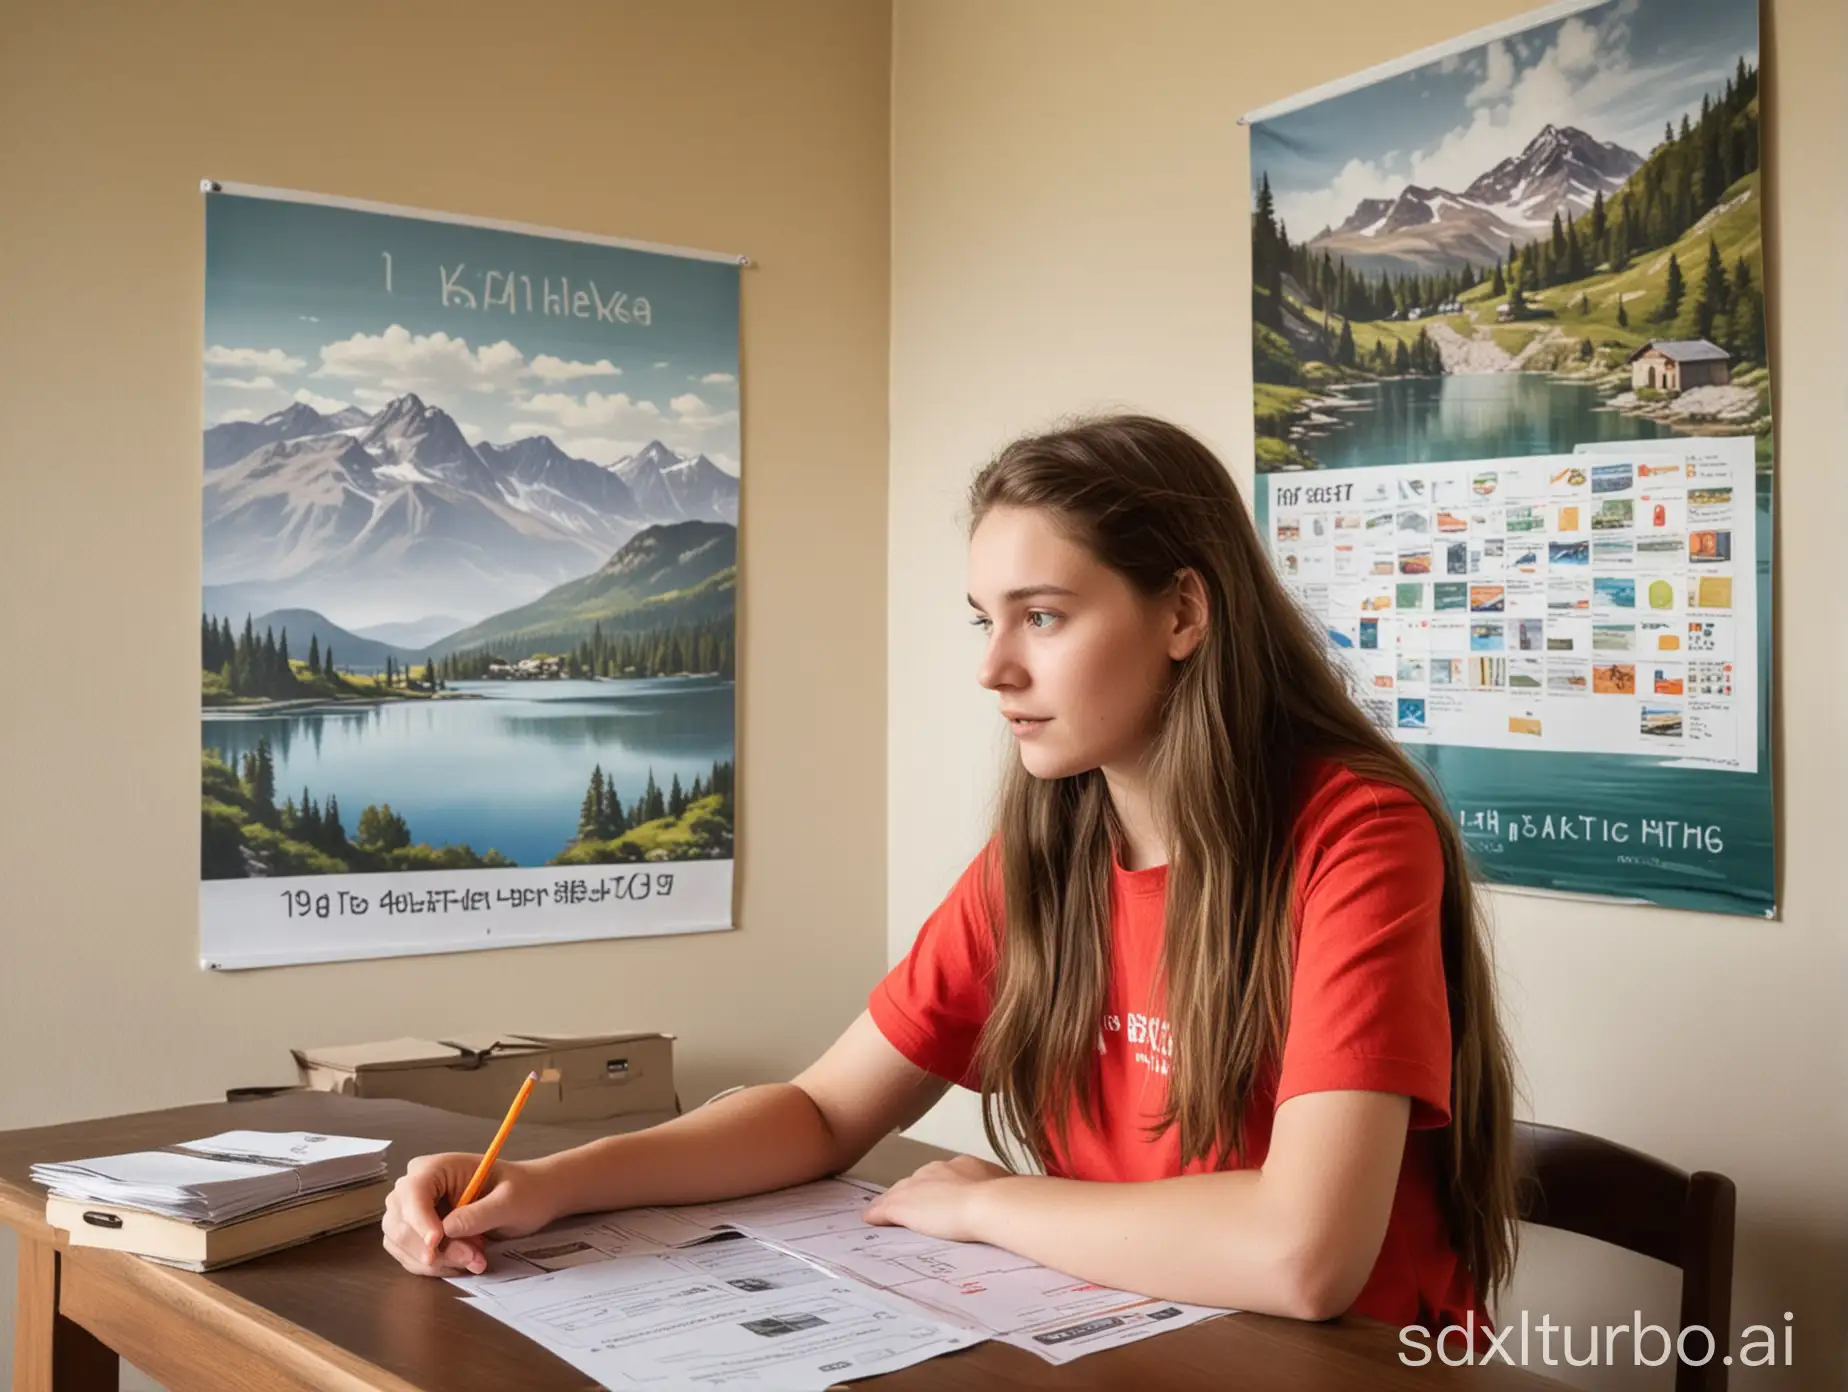 16 year old girl learns with a flashcard box. in the background is a poster on the wall - it shows a lake and a mountain